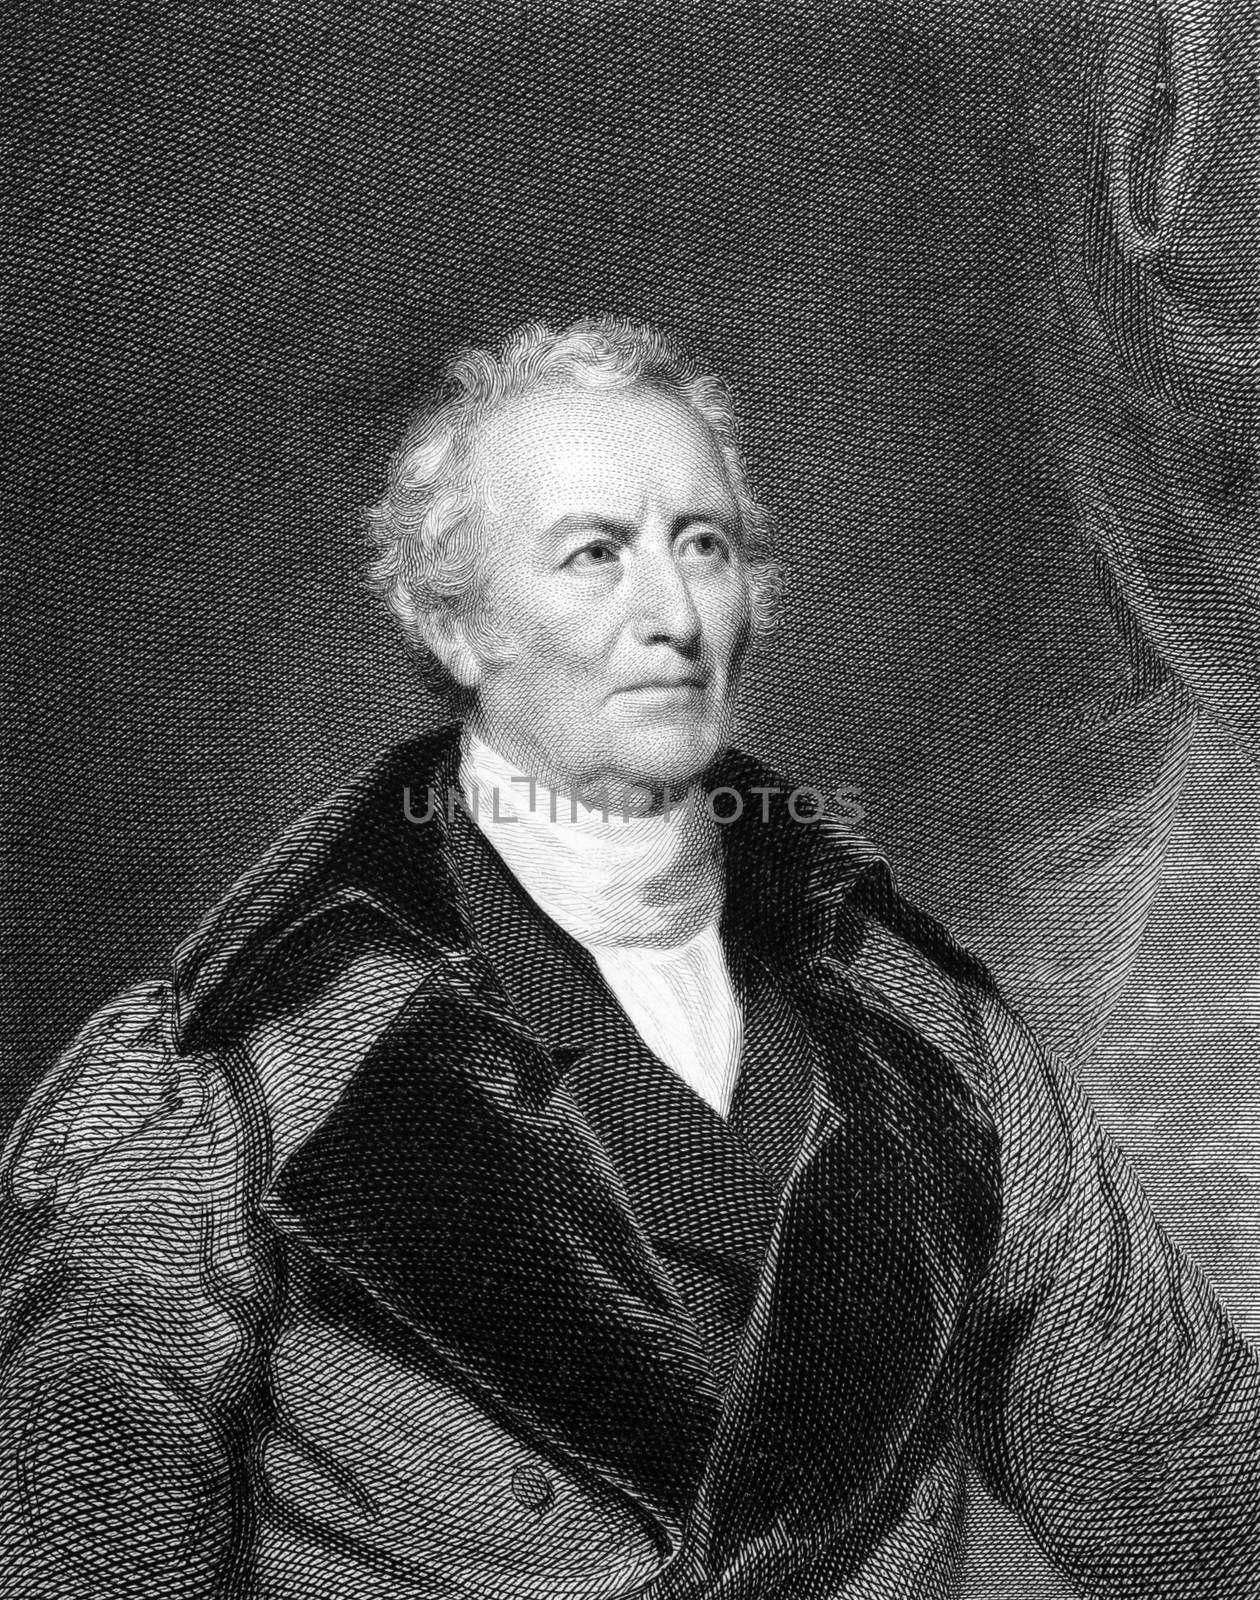 John Trumbull (1756-1843) on engraving from 1834.  American painter during the period of the American Revolutionary War. Engraved by A.B Durand and published in ''National Portrait Gallery of Distinguished Americans'',USA,1834.